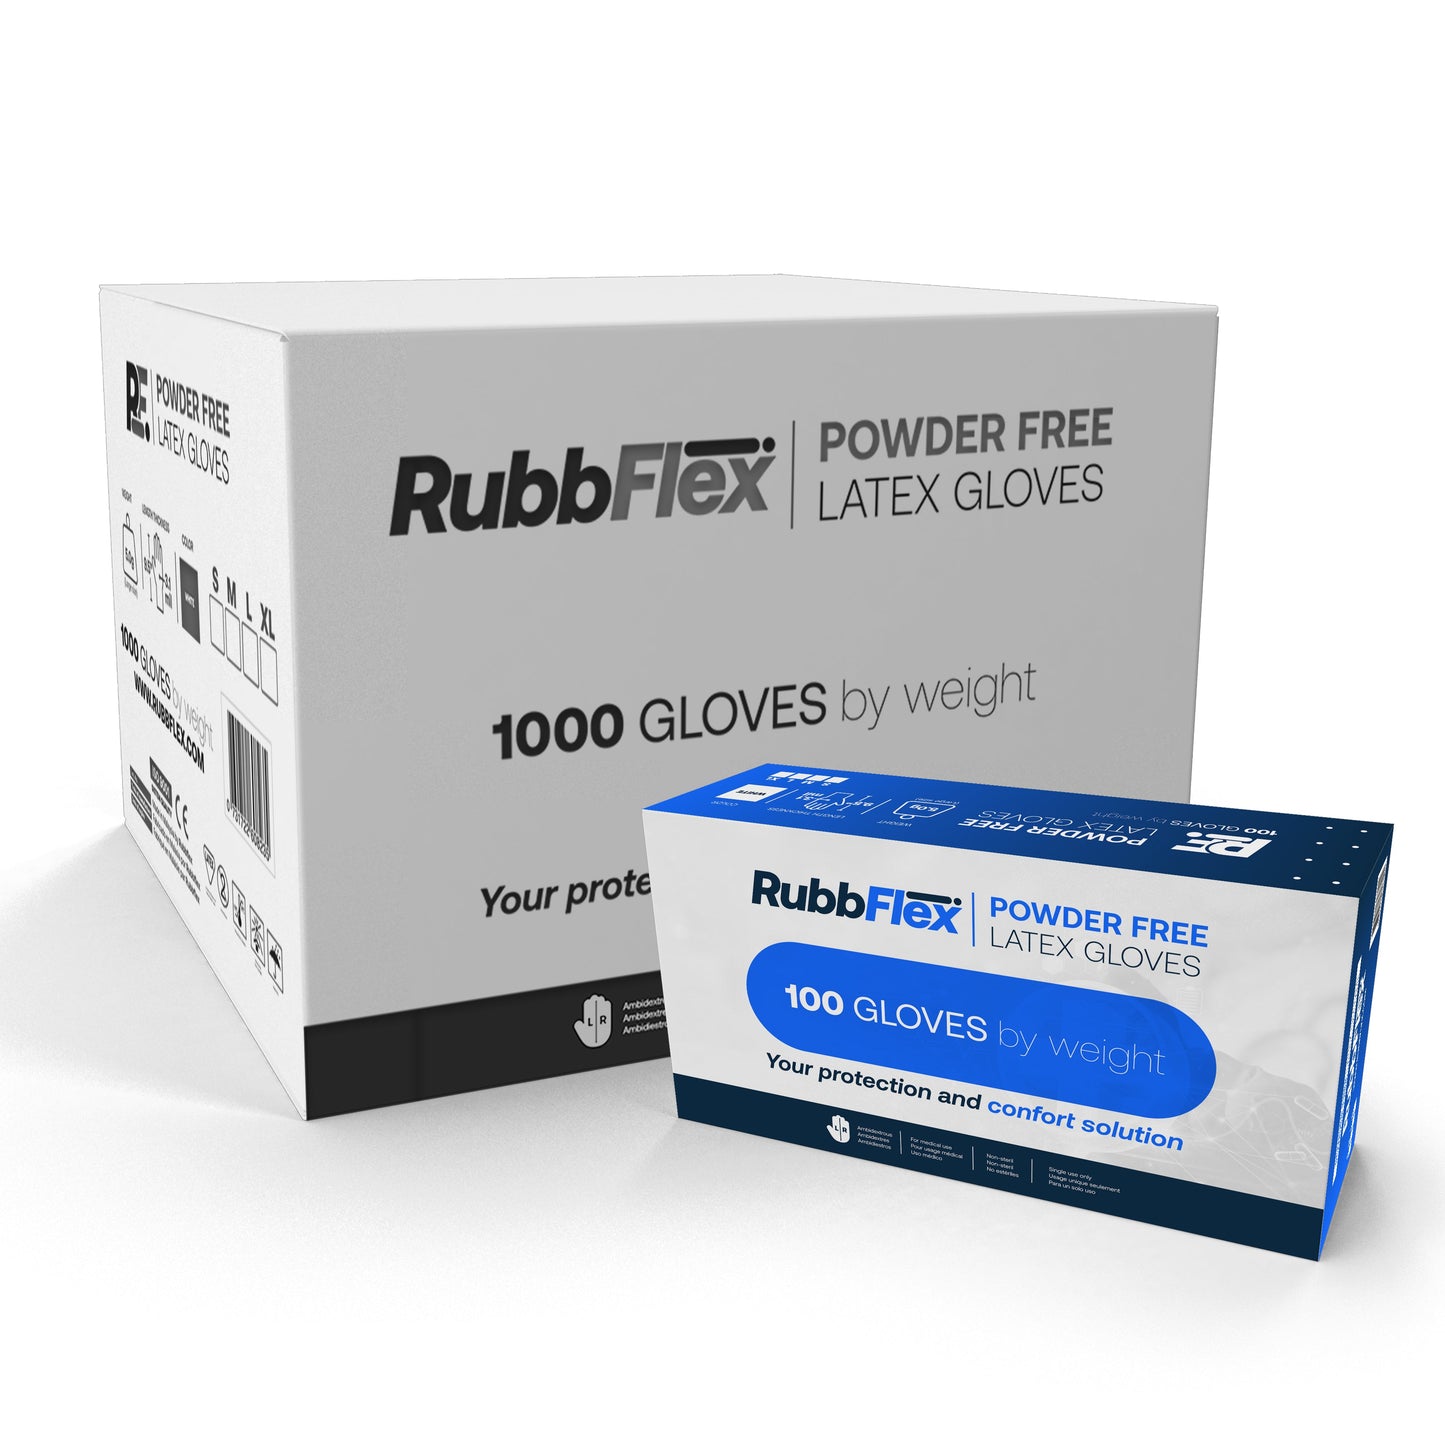 Rubbflex Latex Powder Free Disposable Gloves RLX1000S - Medical Exam Grade - 3.1 mil Thick (Pack of 1000) SMALL